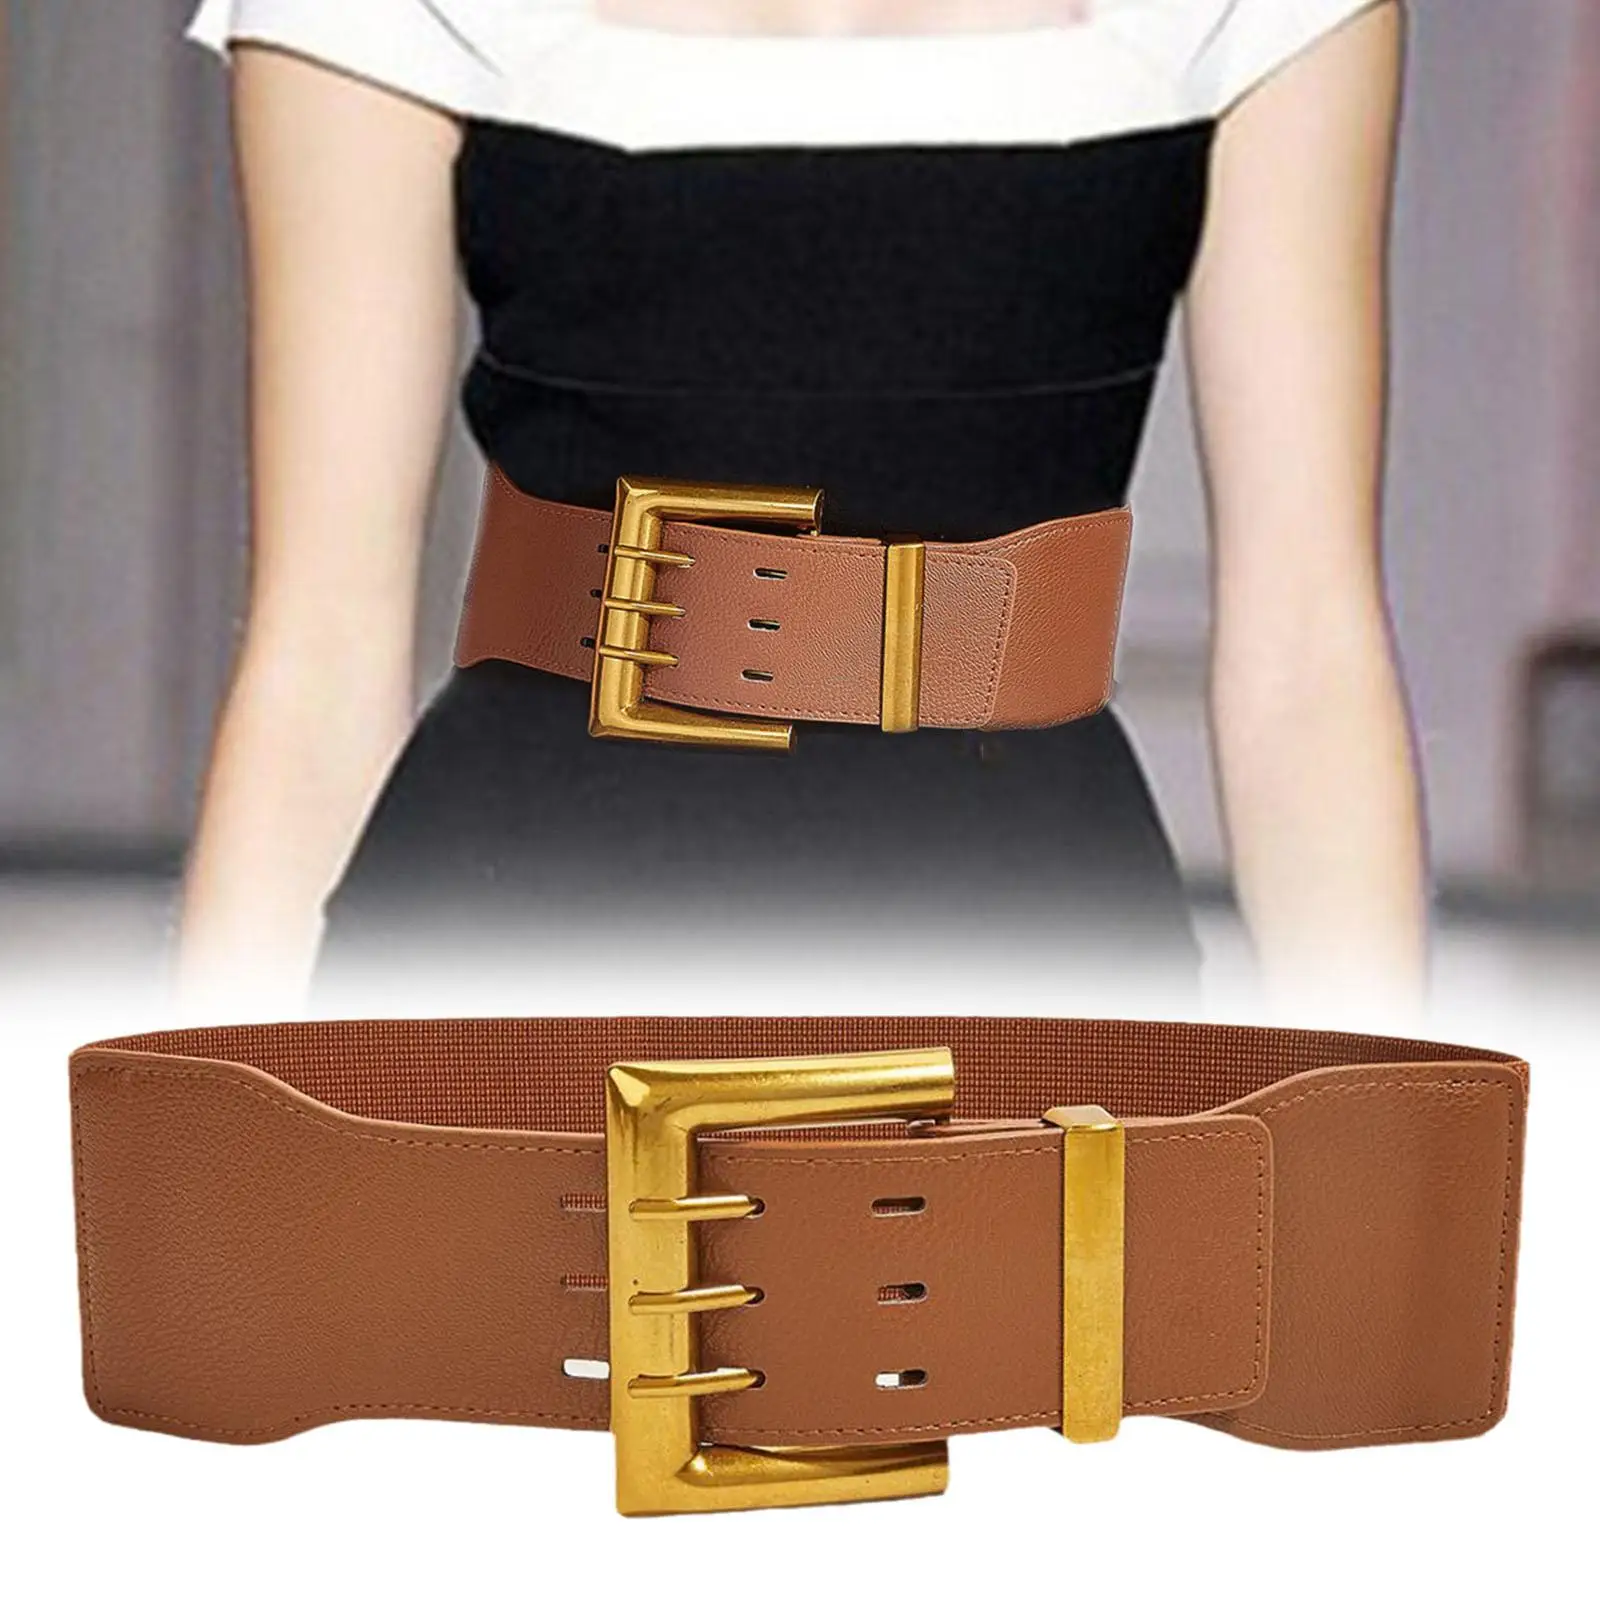 Women`s Wide Elastic Belt Decor Cinch Belt Decorative Belt Girdle Solid Color PU Leather Waistband for Lady Clothing Accessories